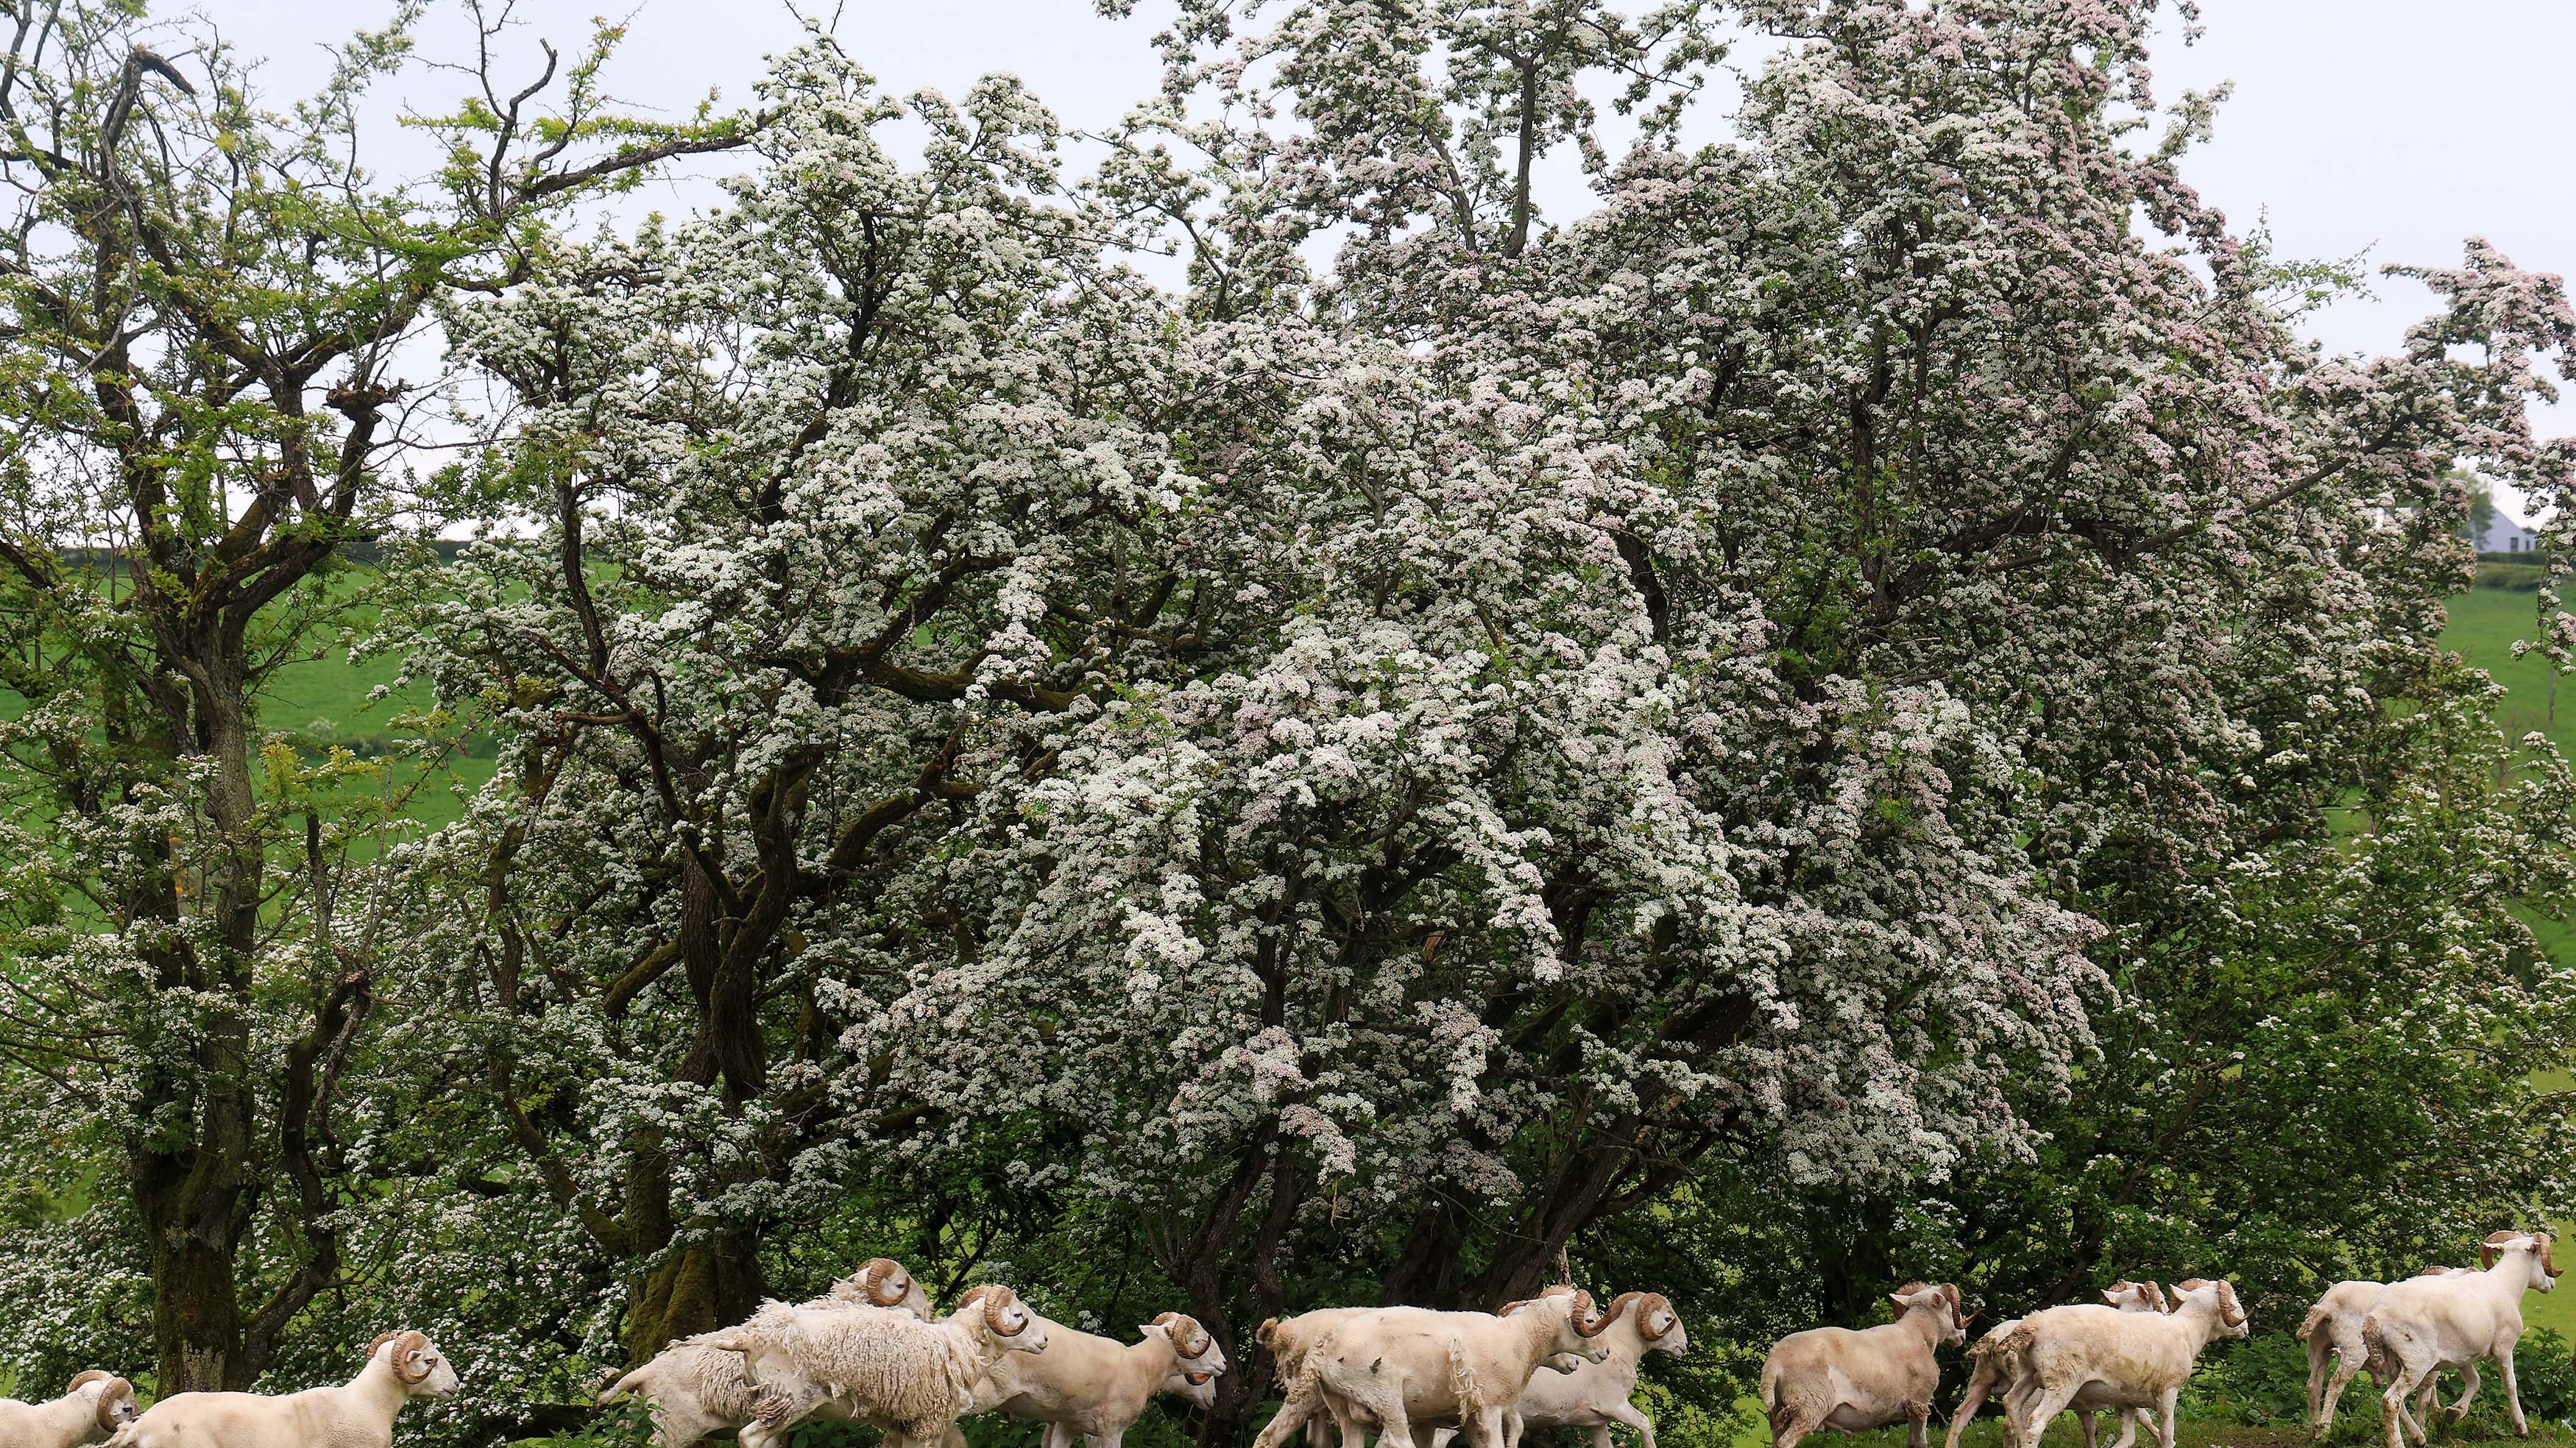 Sheep pass by a Hawthorn tree in full bloom. Co Antrim. PICTURE: MAL MCCANN